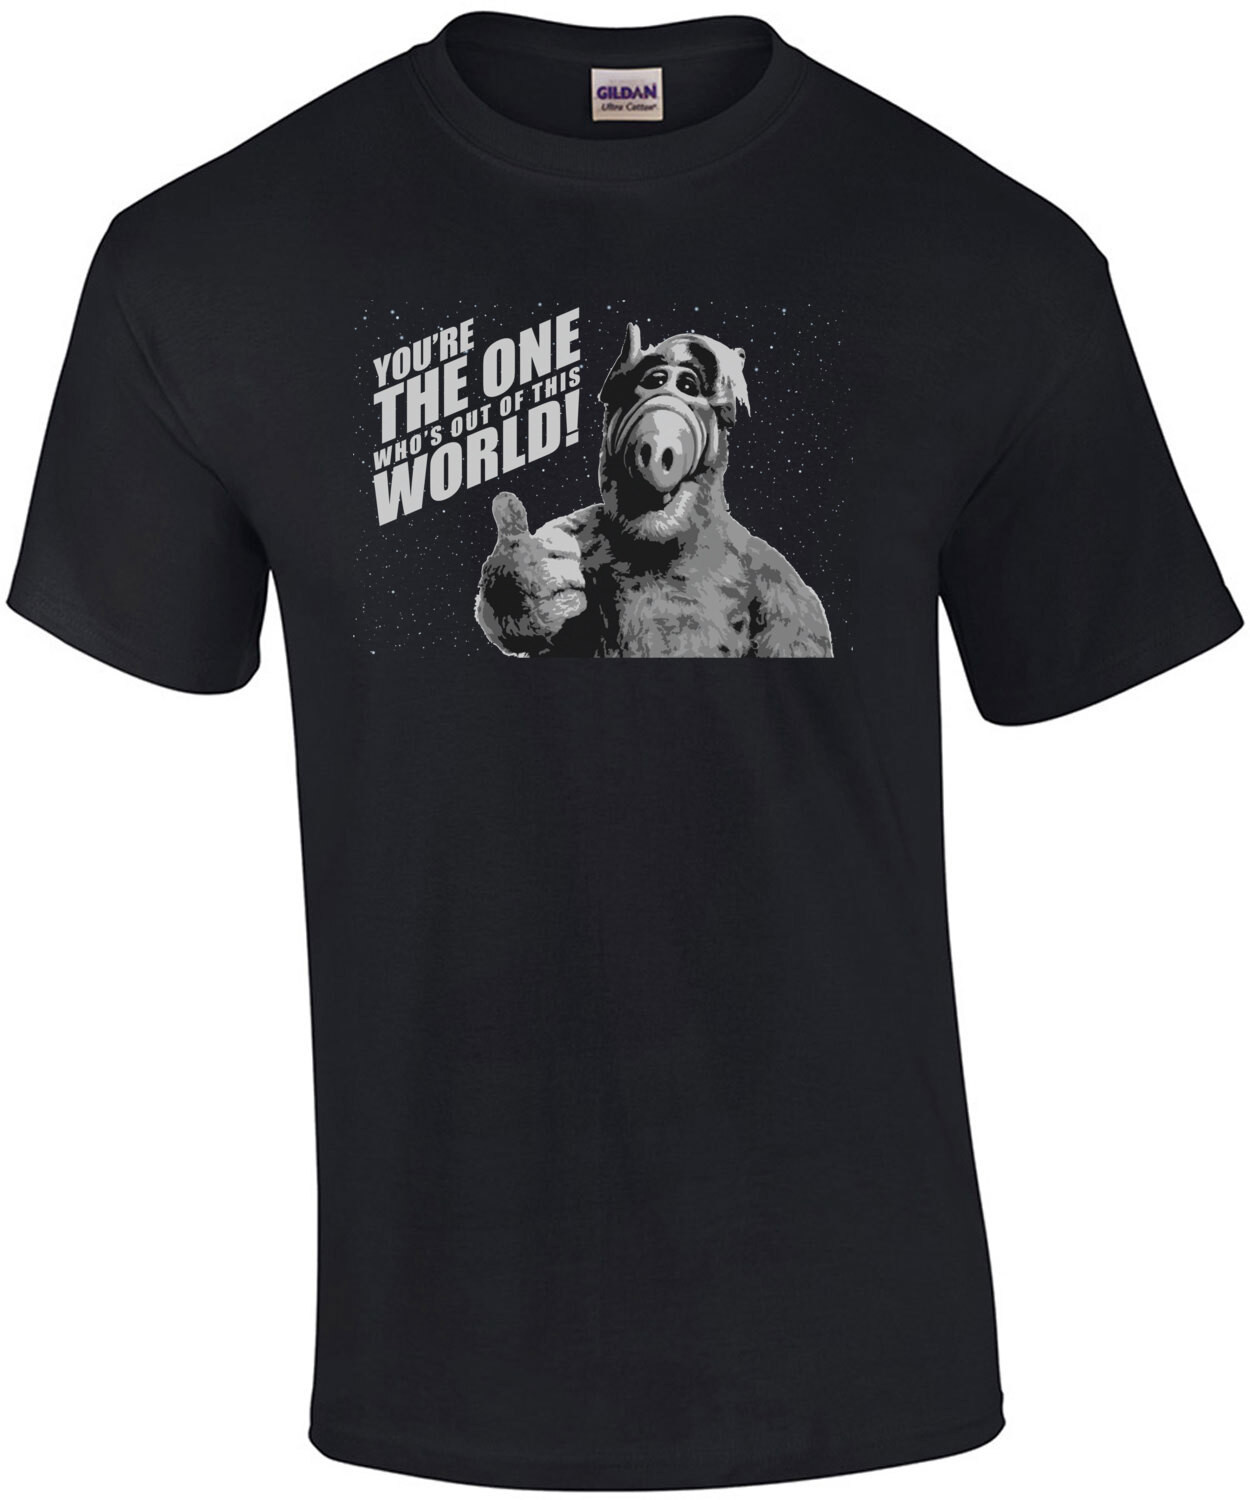 You're the one who's out of this world! Alf T-Shirt - 80's T-Shirt